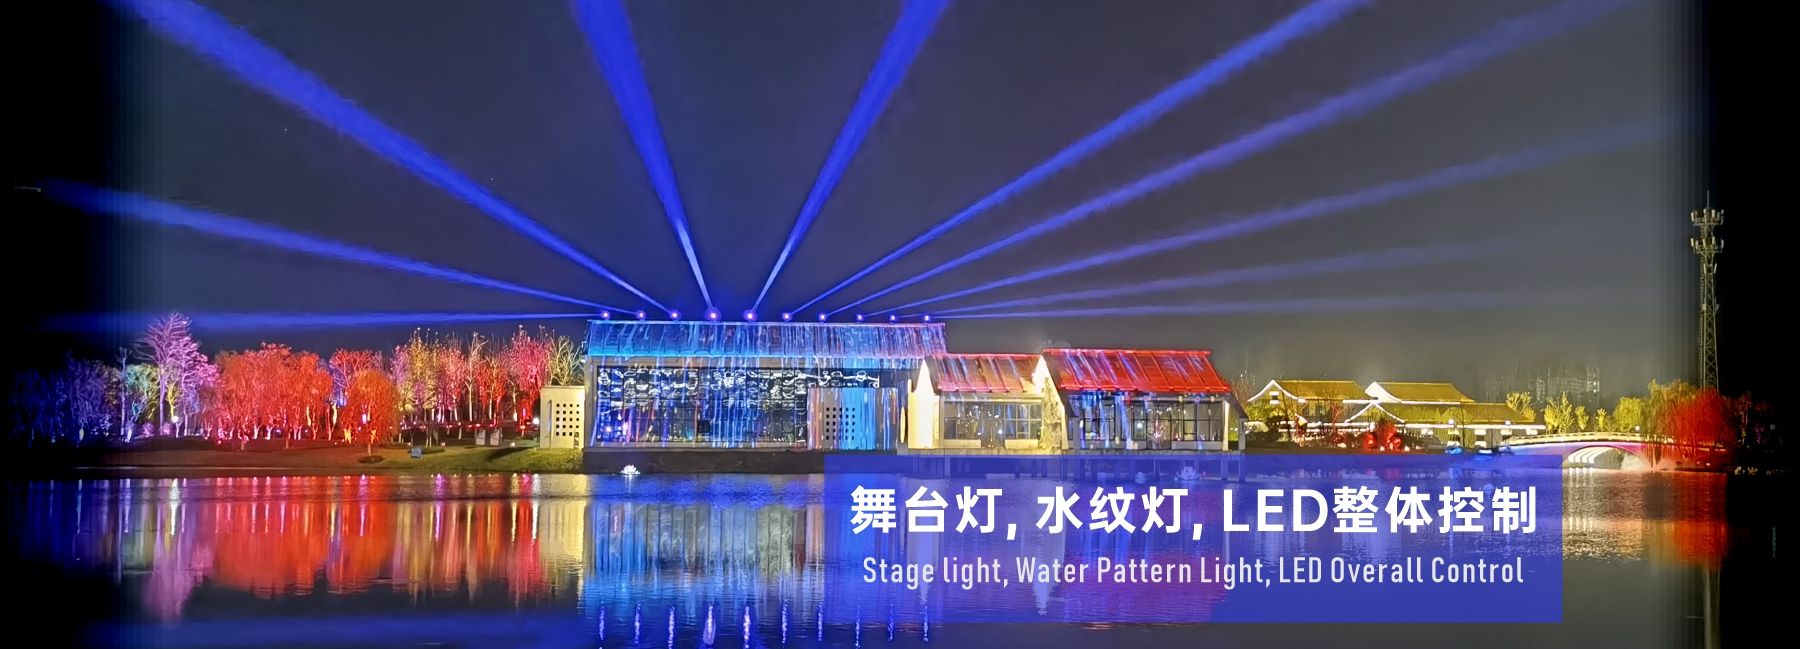 Stage light, Water Pattern Light, LED Overall Control